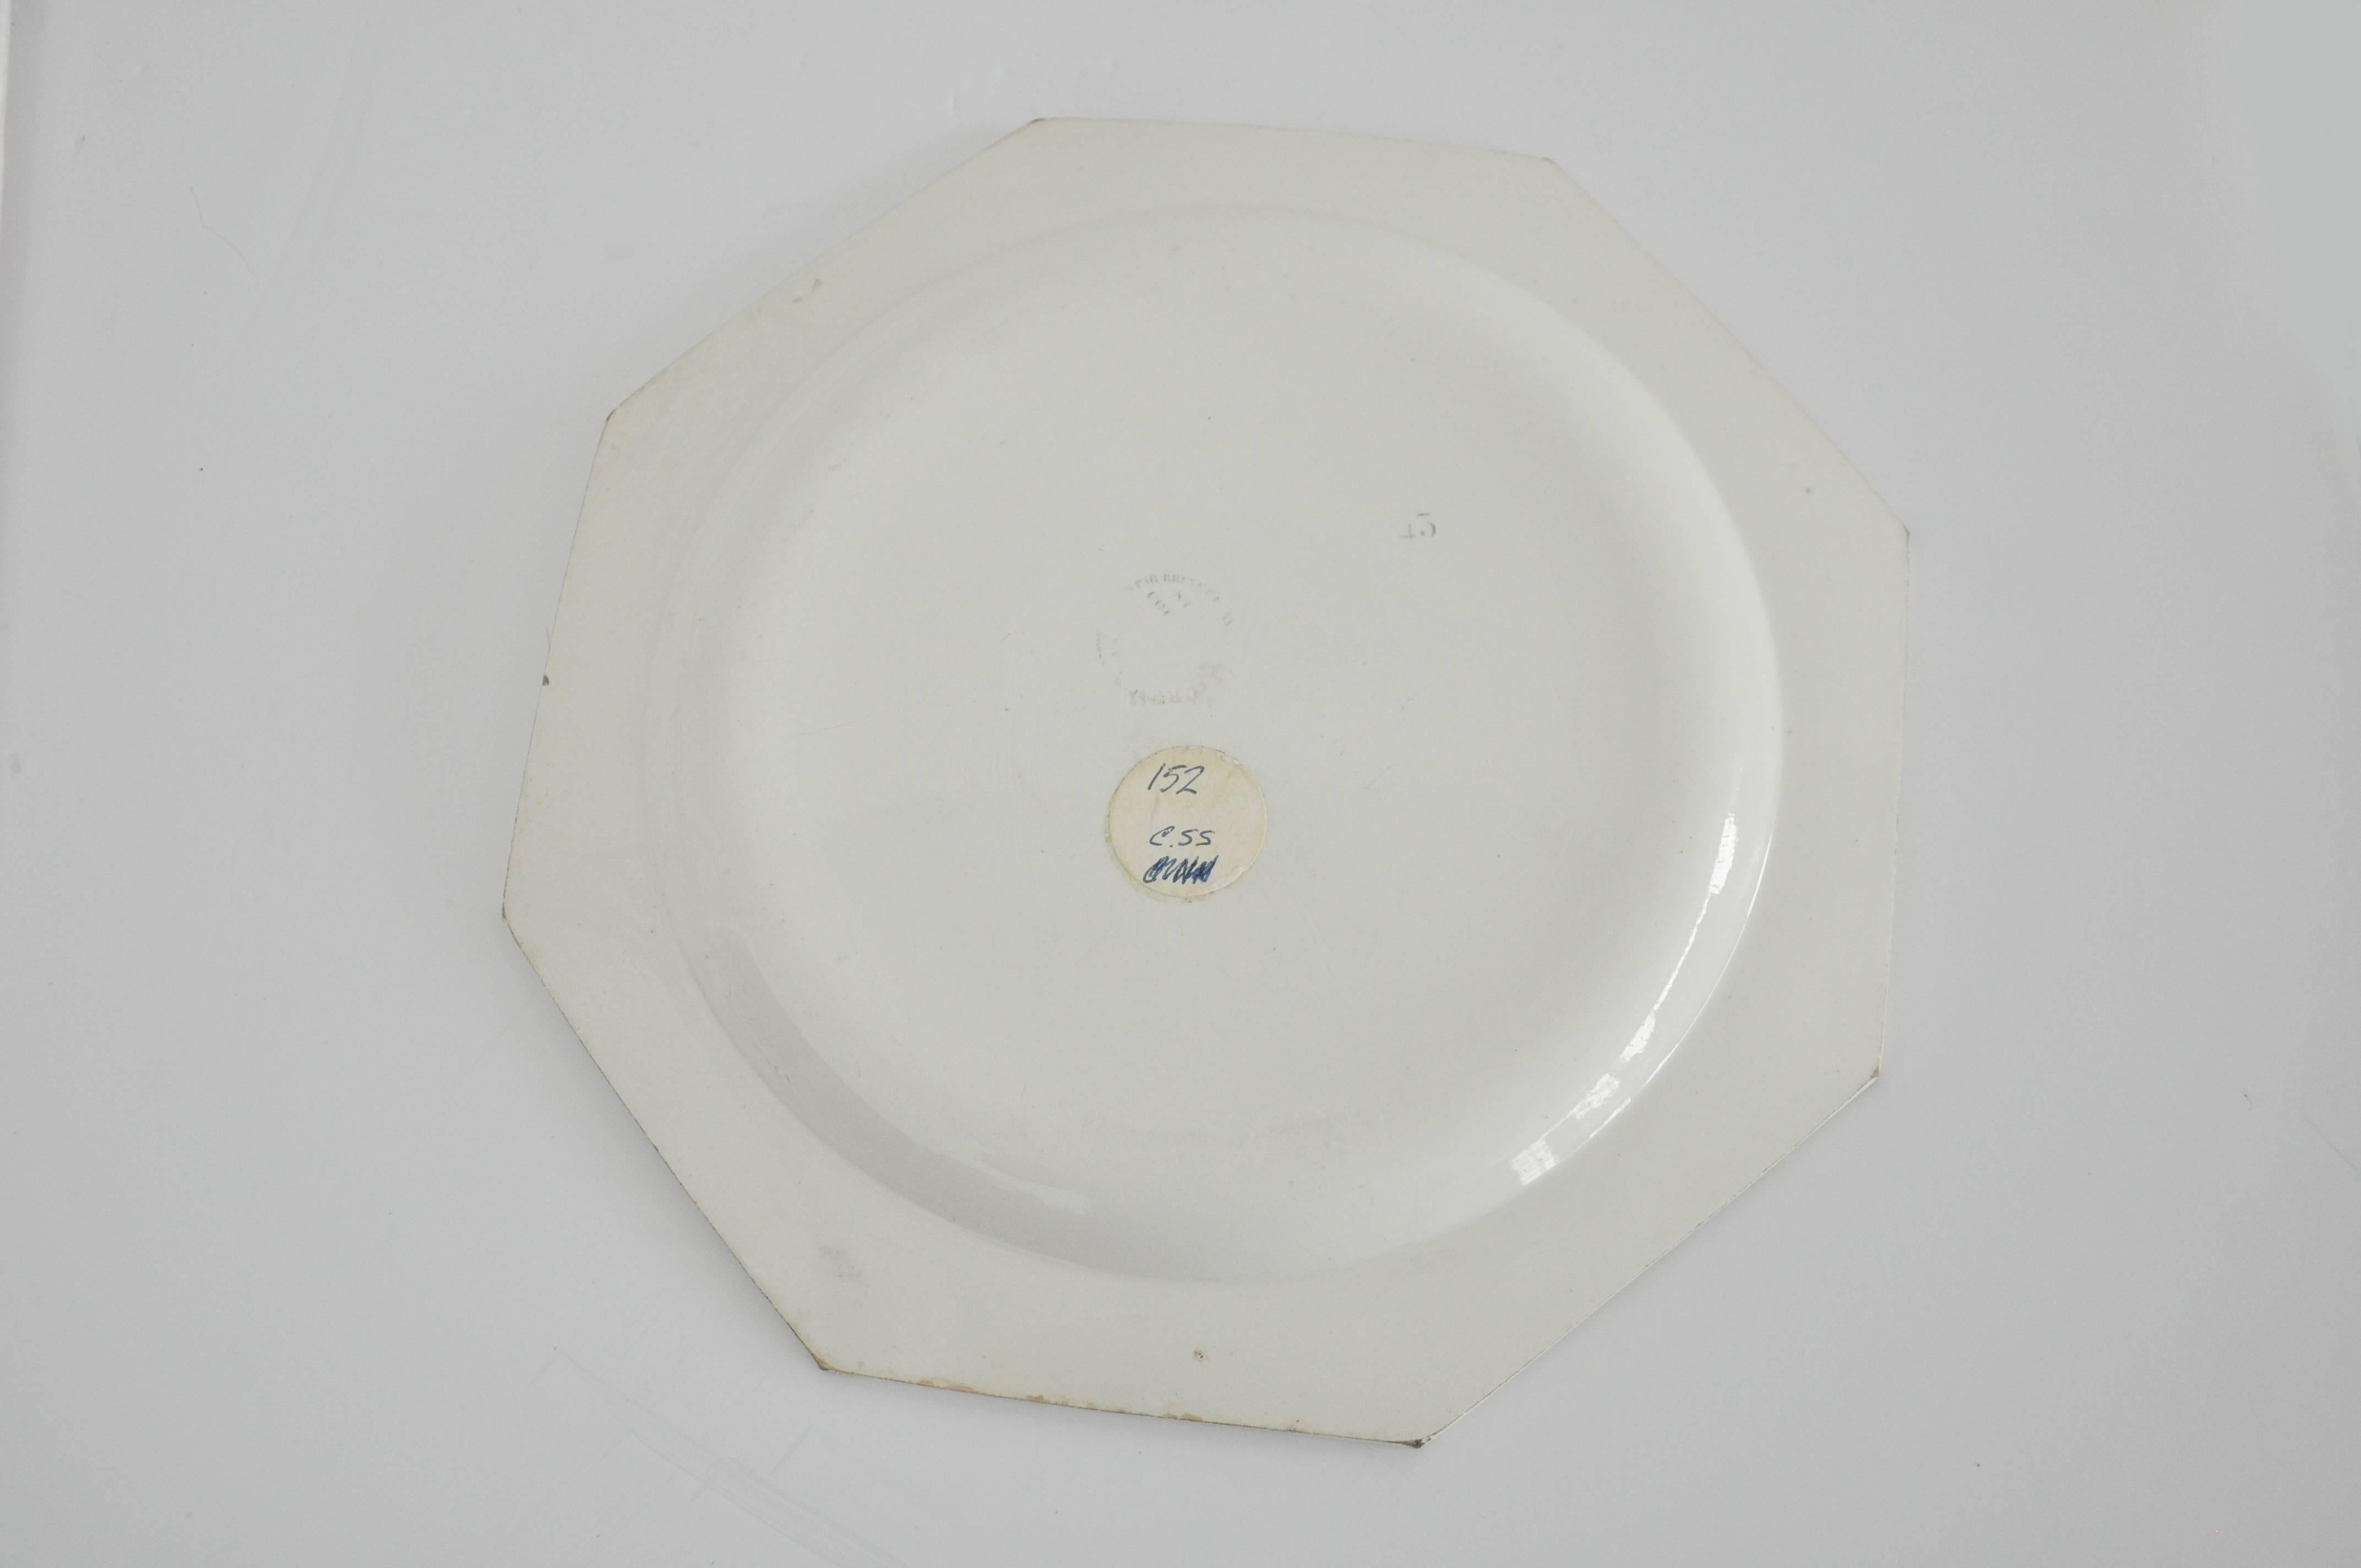 Transferware octogon shaped plate. Aging to paint, no chips, 1860.